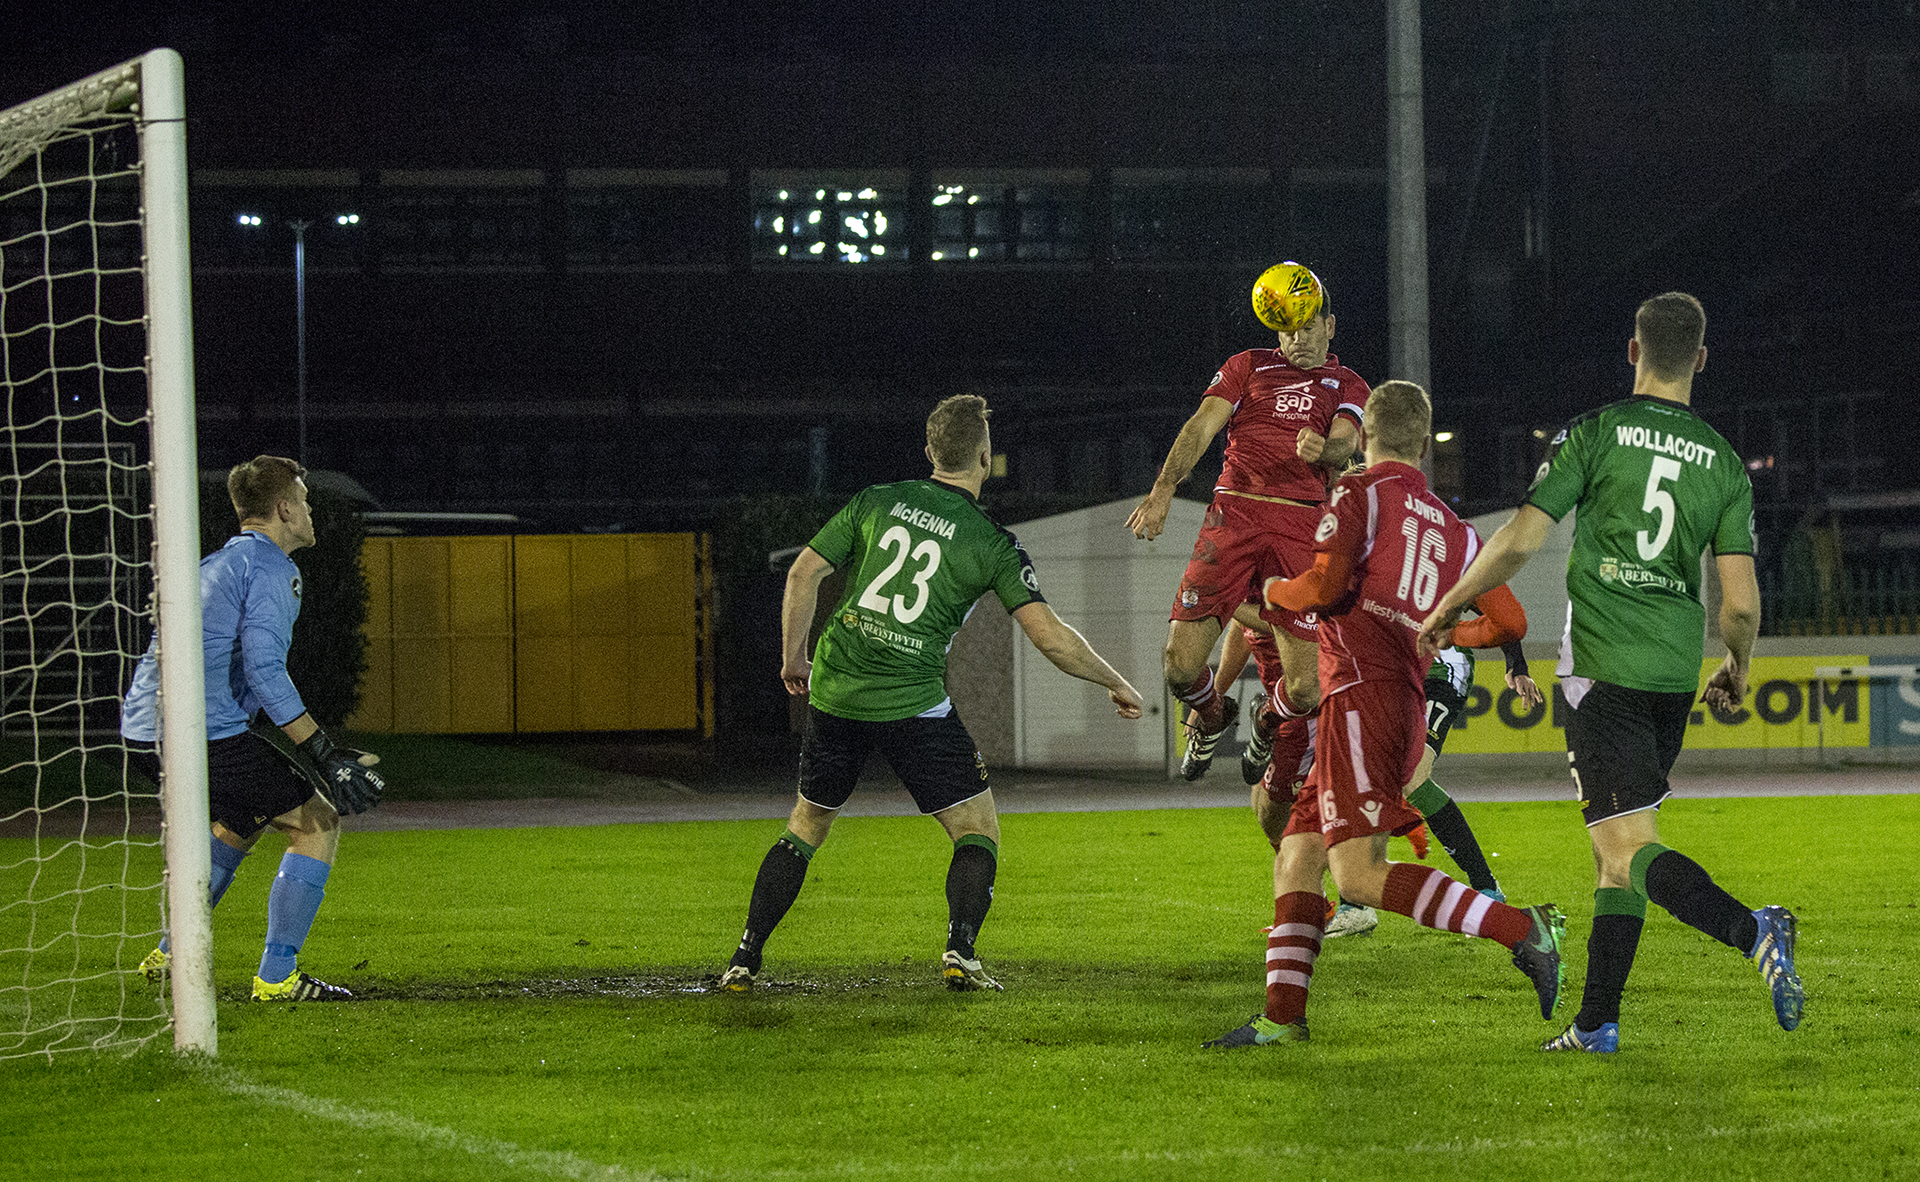 Michael Wilde rises highest to give The Nomads the lead in the seventh minute - © NCM Media